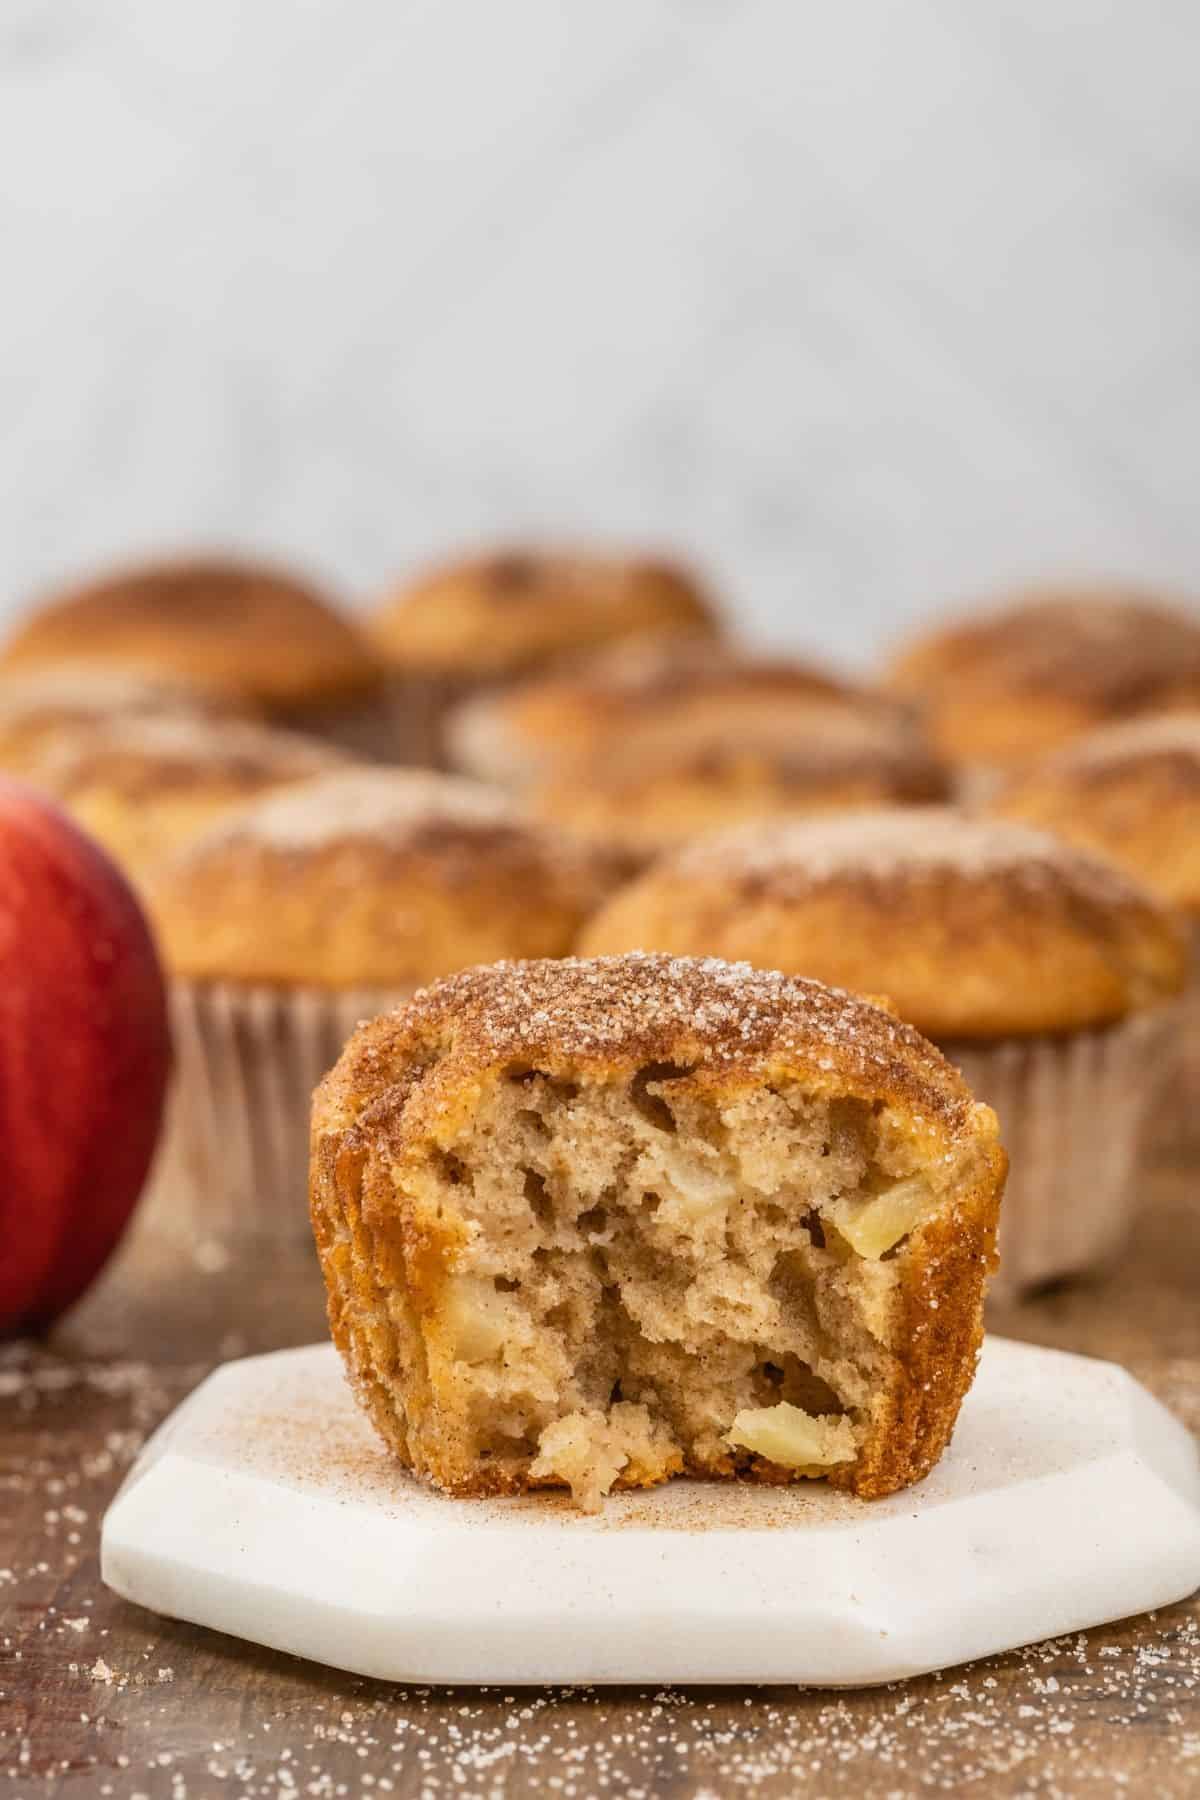 a single apple cinnamon muffin rests on a marble coaster. a bite is taken out of the muffin to show off the texture on the inside. more muffins and apples are blurred in the background.